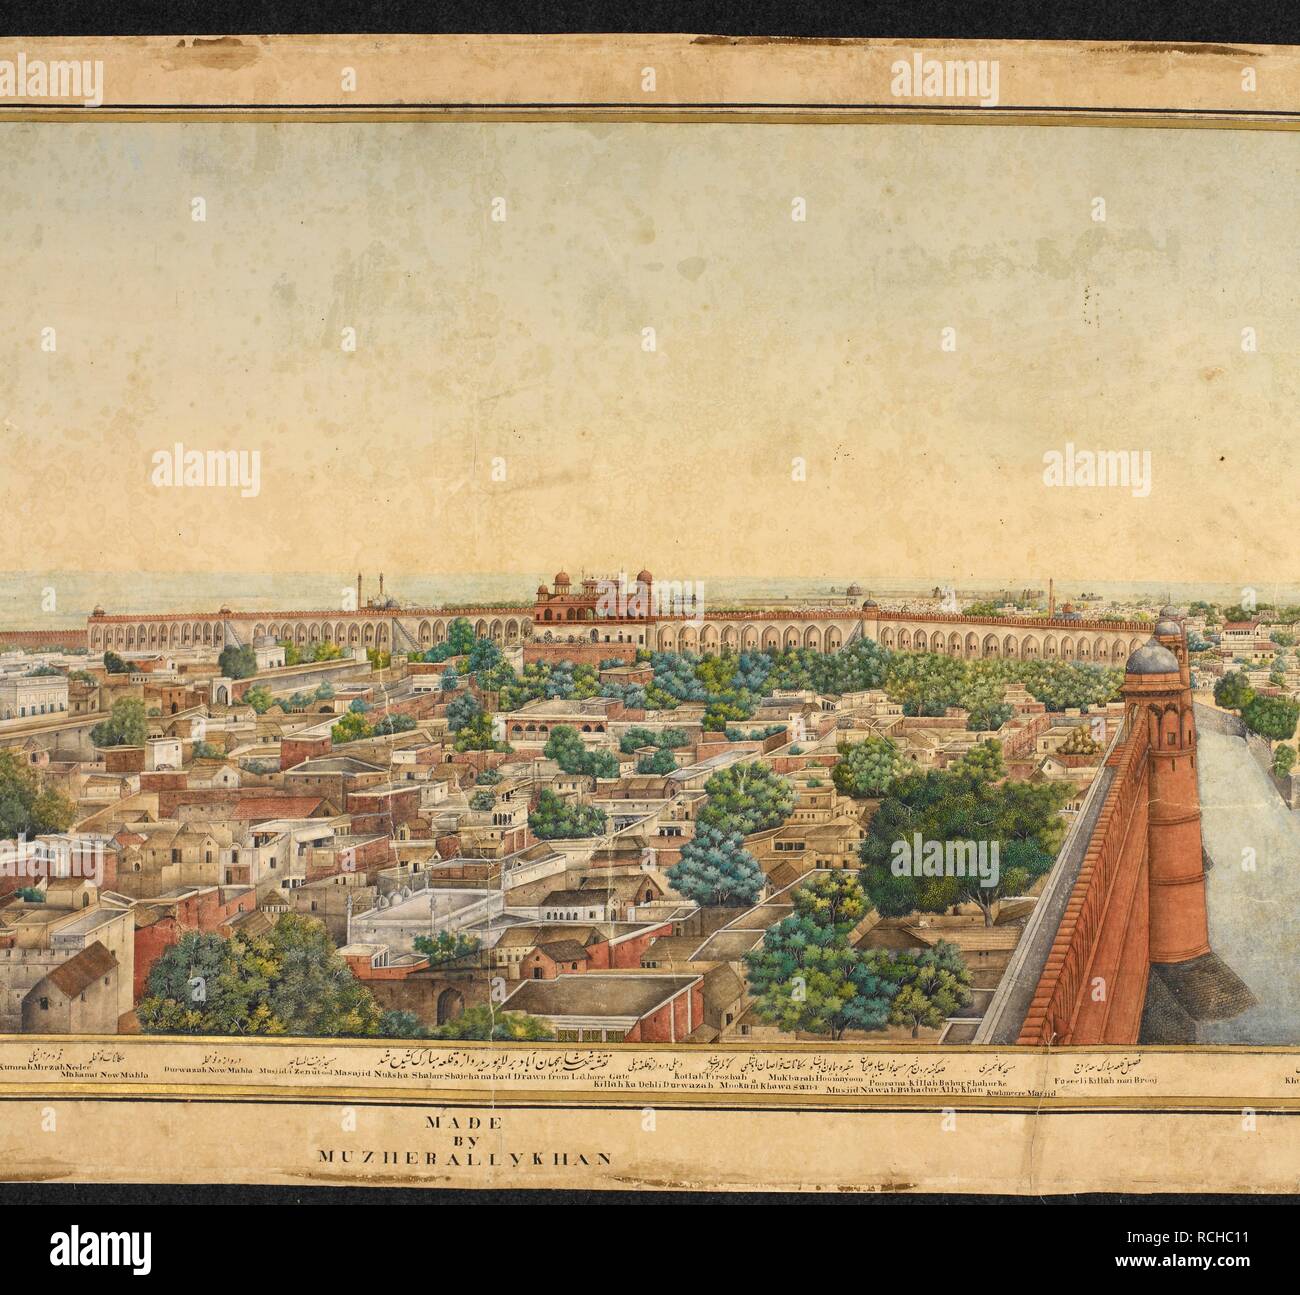 Section from a panorama of Delhi. Panorama of Delhi. 25th November 1846. From a panorama of Delhi taken through almost 360 degrees from the top of the Lahore gate of the Red Fort, Delhi. Inscribed in Persian, Urdu and English. Water-colour and body-colour with gold; 665 by 4908 mm (530 by 4828 mm within frame) on five sheets of paper, glued together to form a scroll. Source: Add.Or.4126. Language: Persian, English and Urdu. Author: Khan, Mazhar 'Ali. Stock Photo